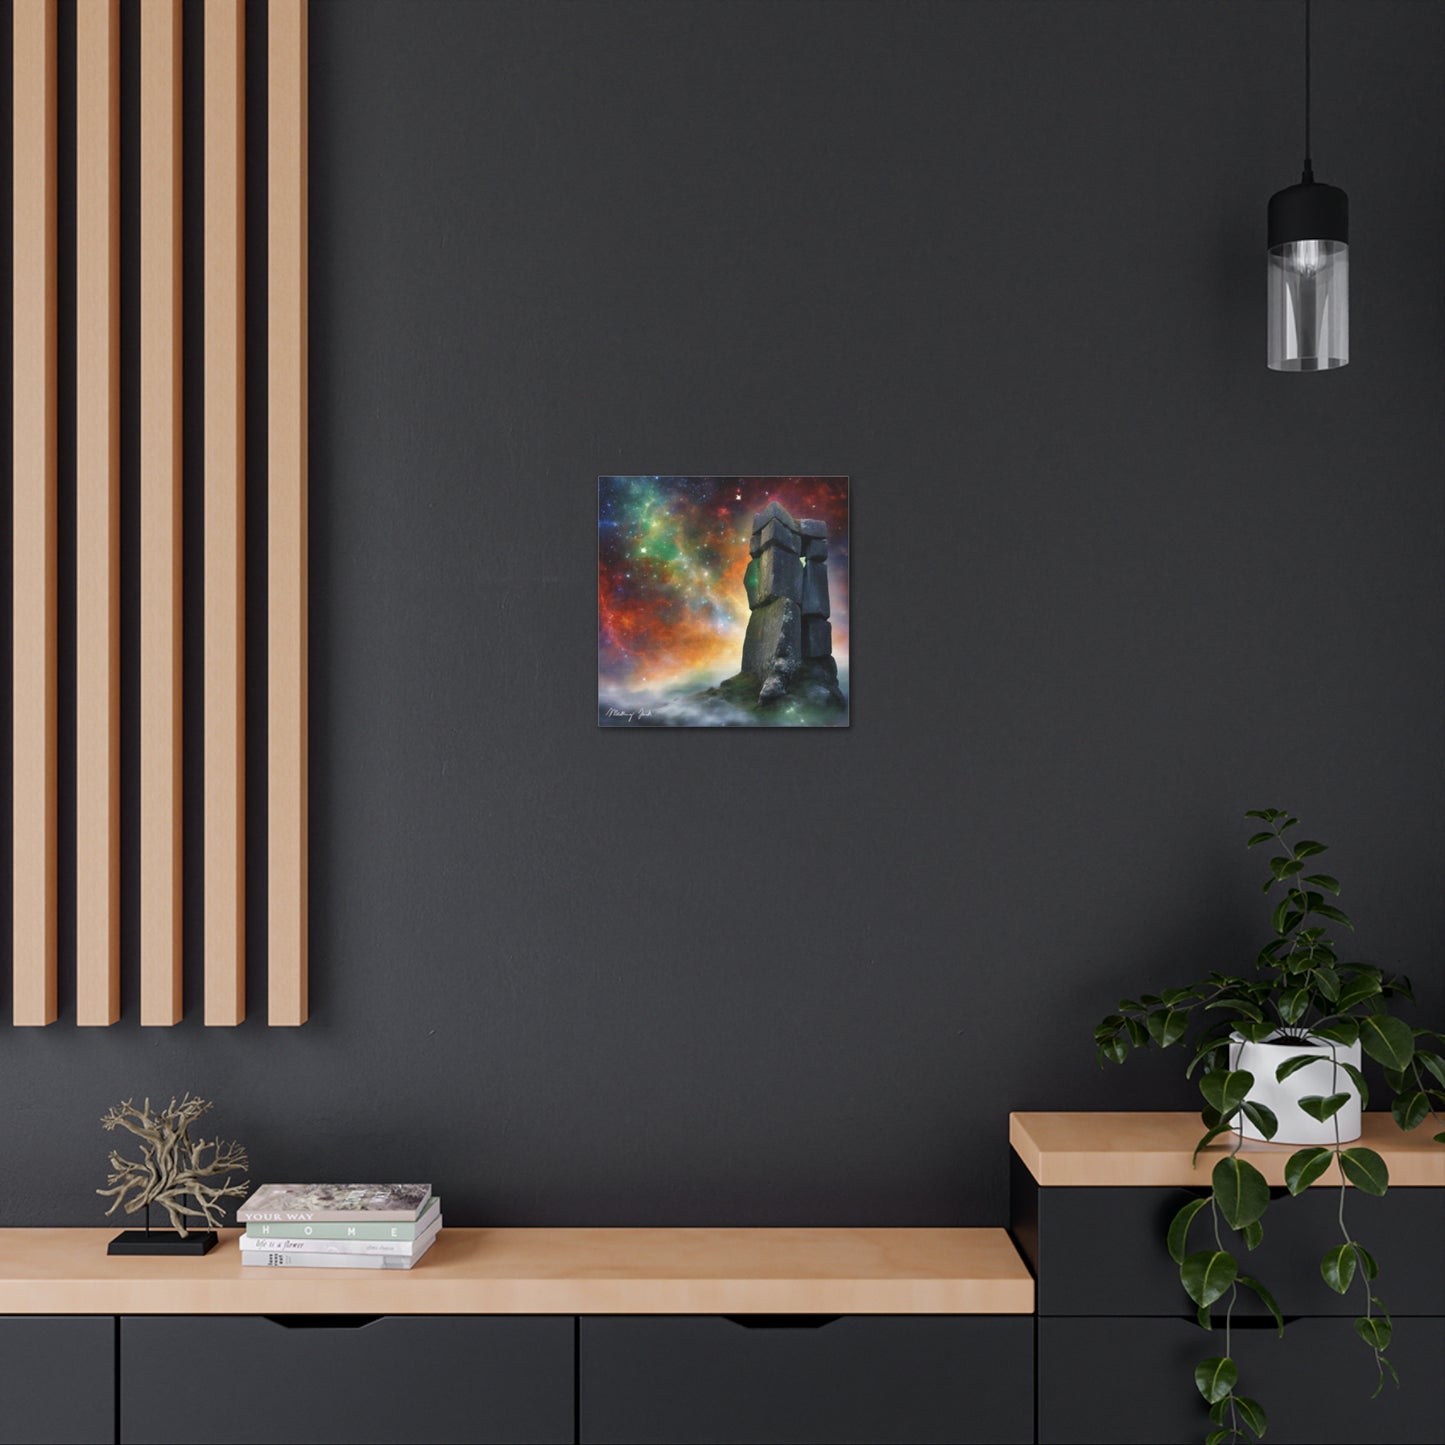 Medieval Stone at Night Canvas Gallery Wraps